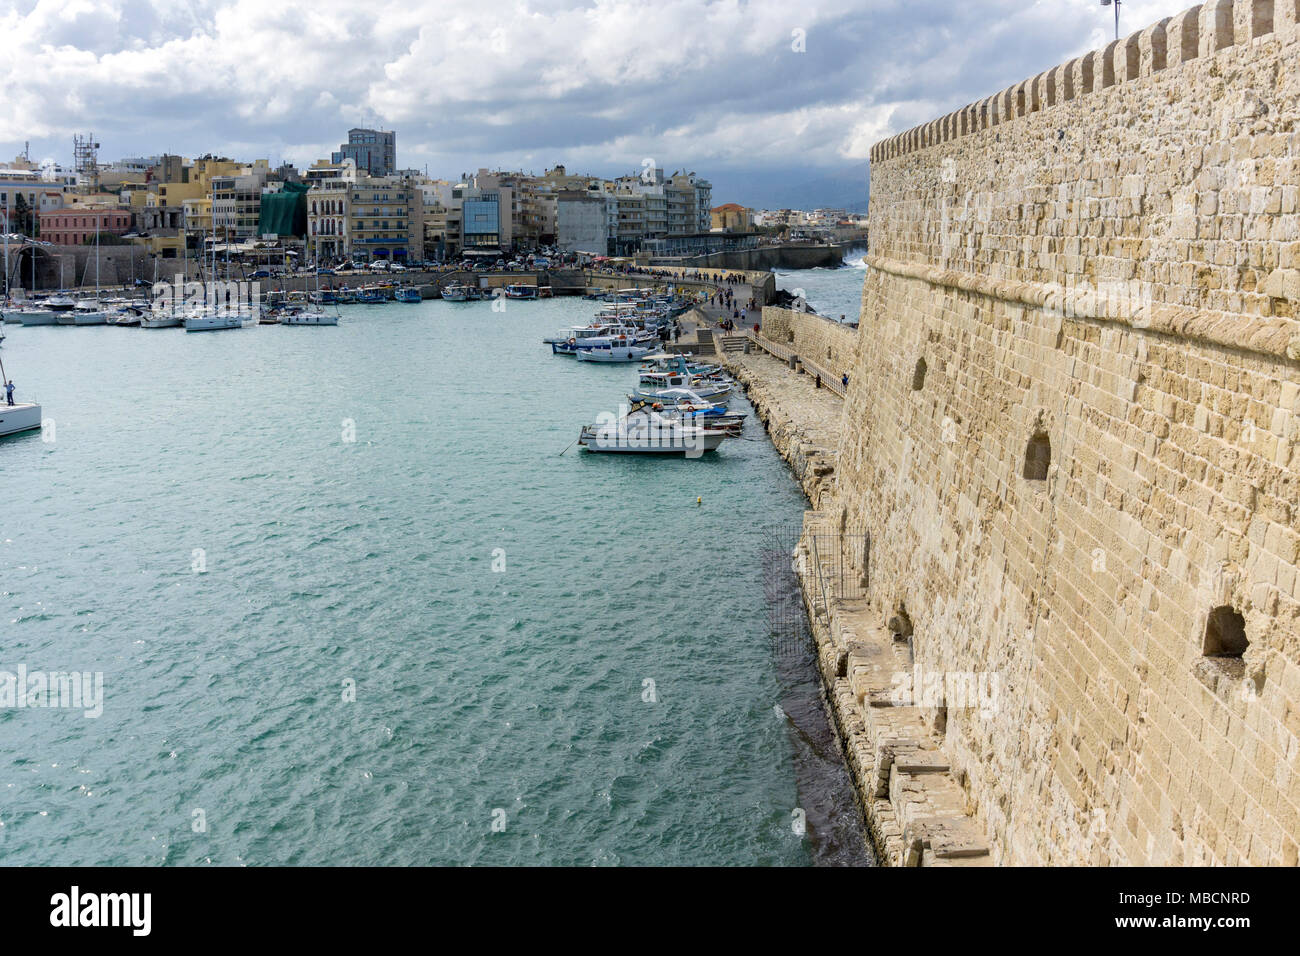 Panoramic view of the city of Heraklion in Crete, Greece showing a part of the fortress 'Koules' (castello a mare) Stock Photo